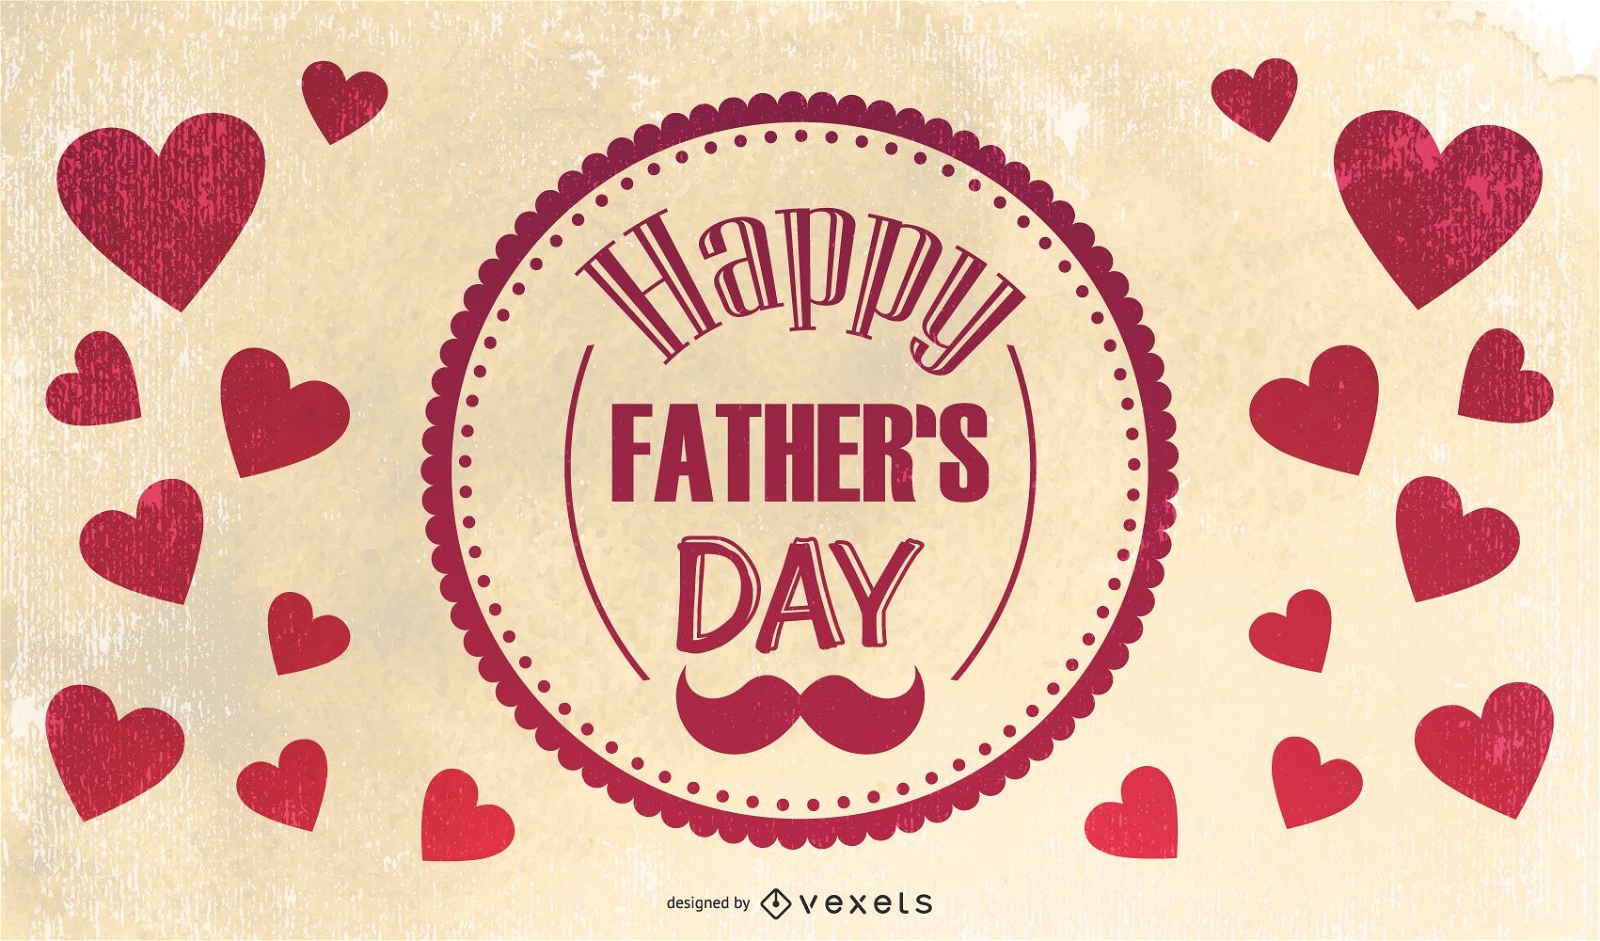 Father?s Day Retro Greeting Card